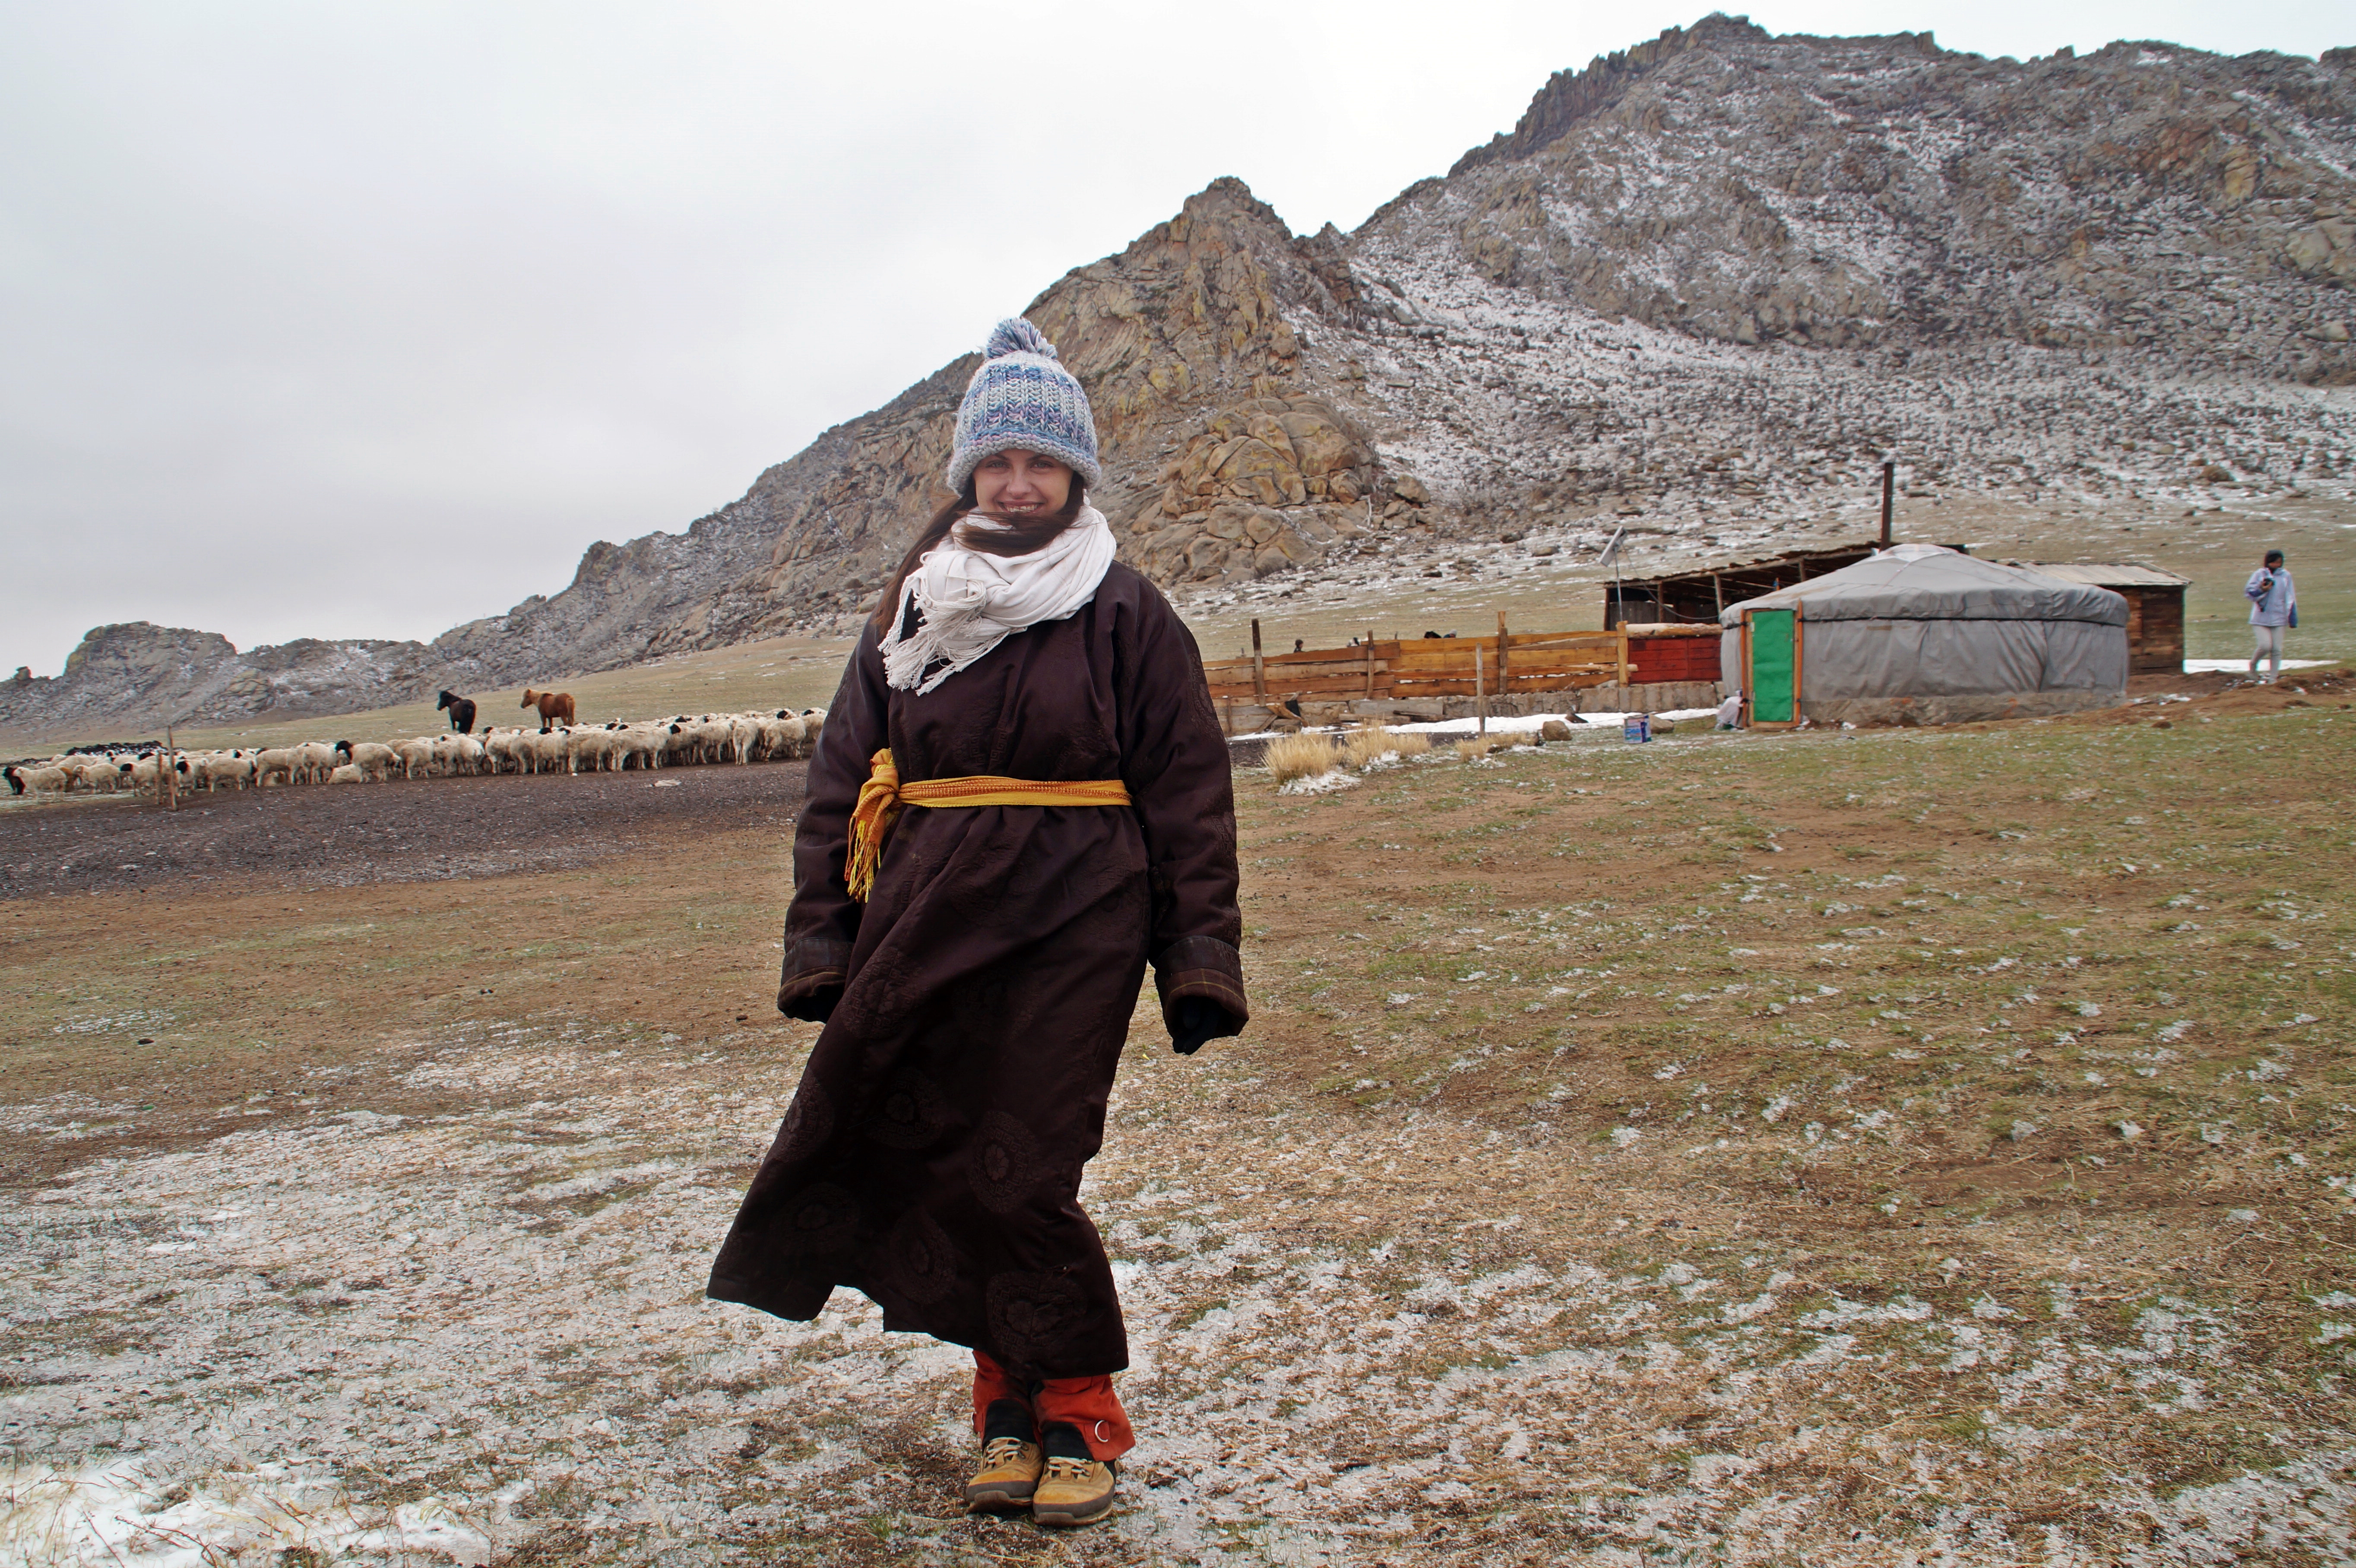 Wearing a deel in front of a ger in Central Mongolia